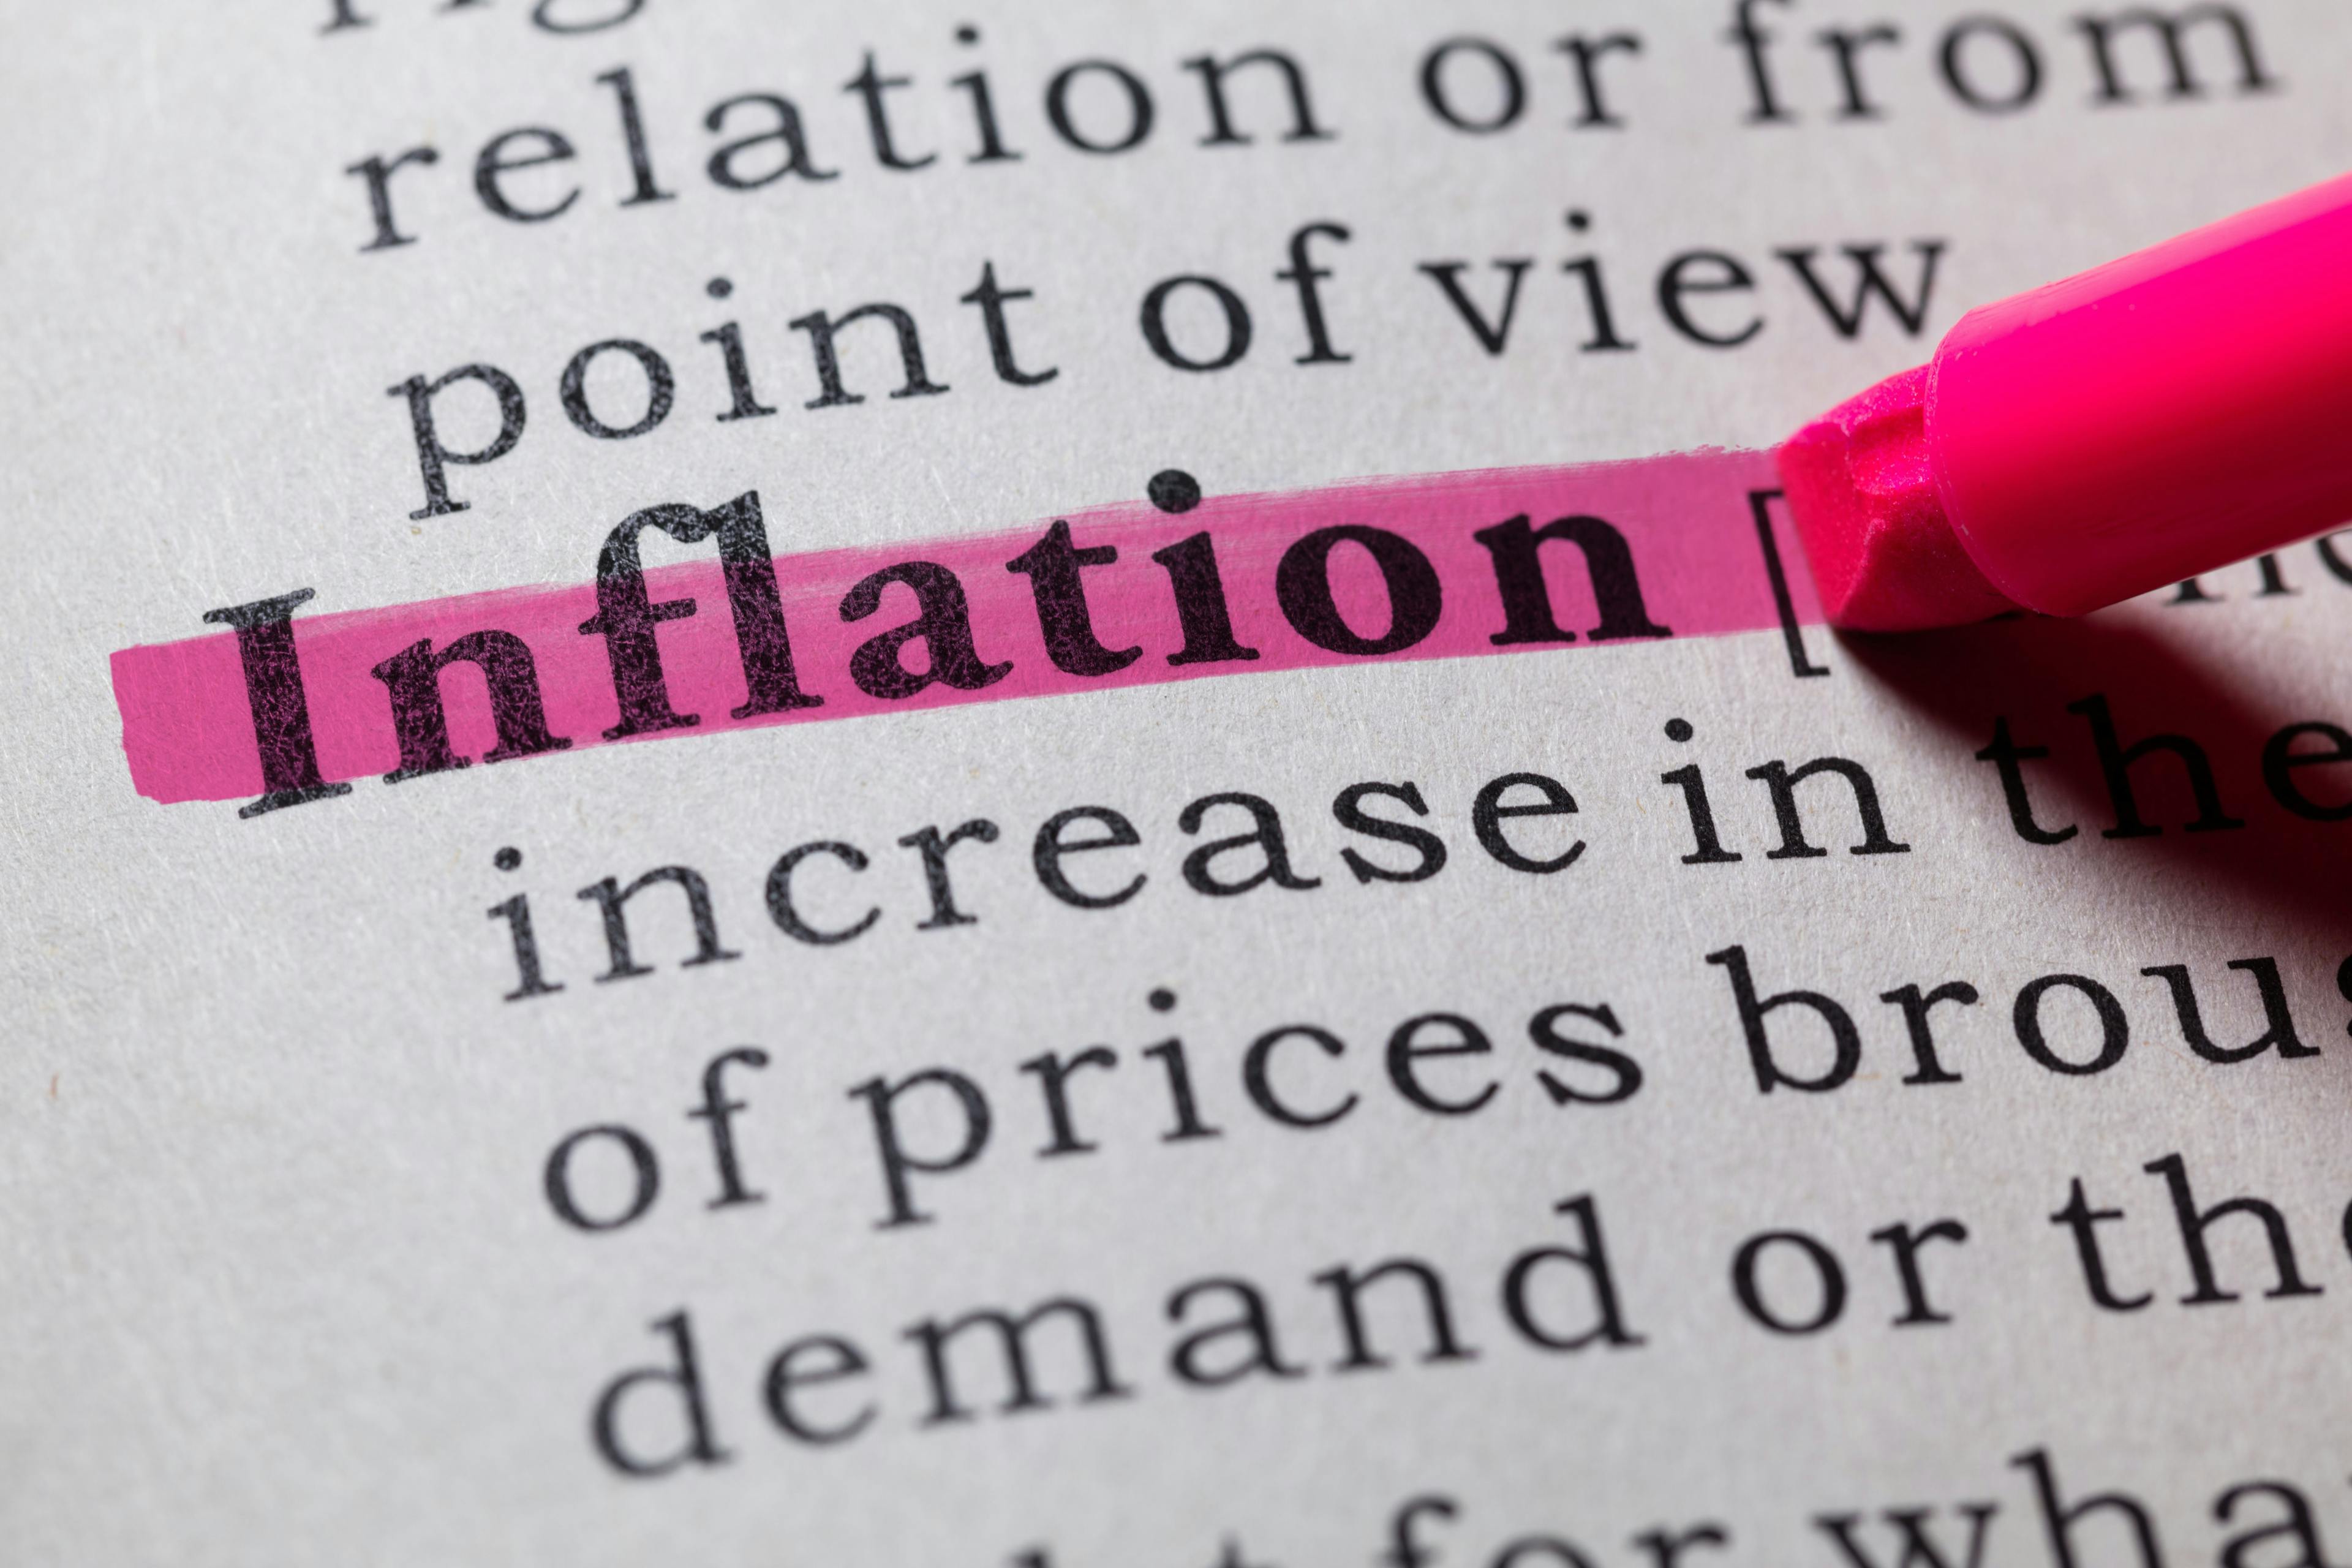 2021 sees 7% inflation